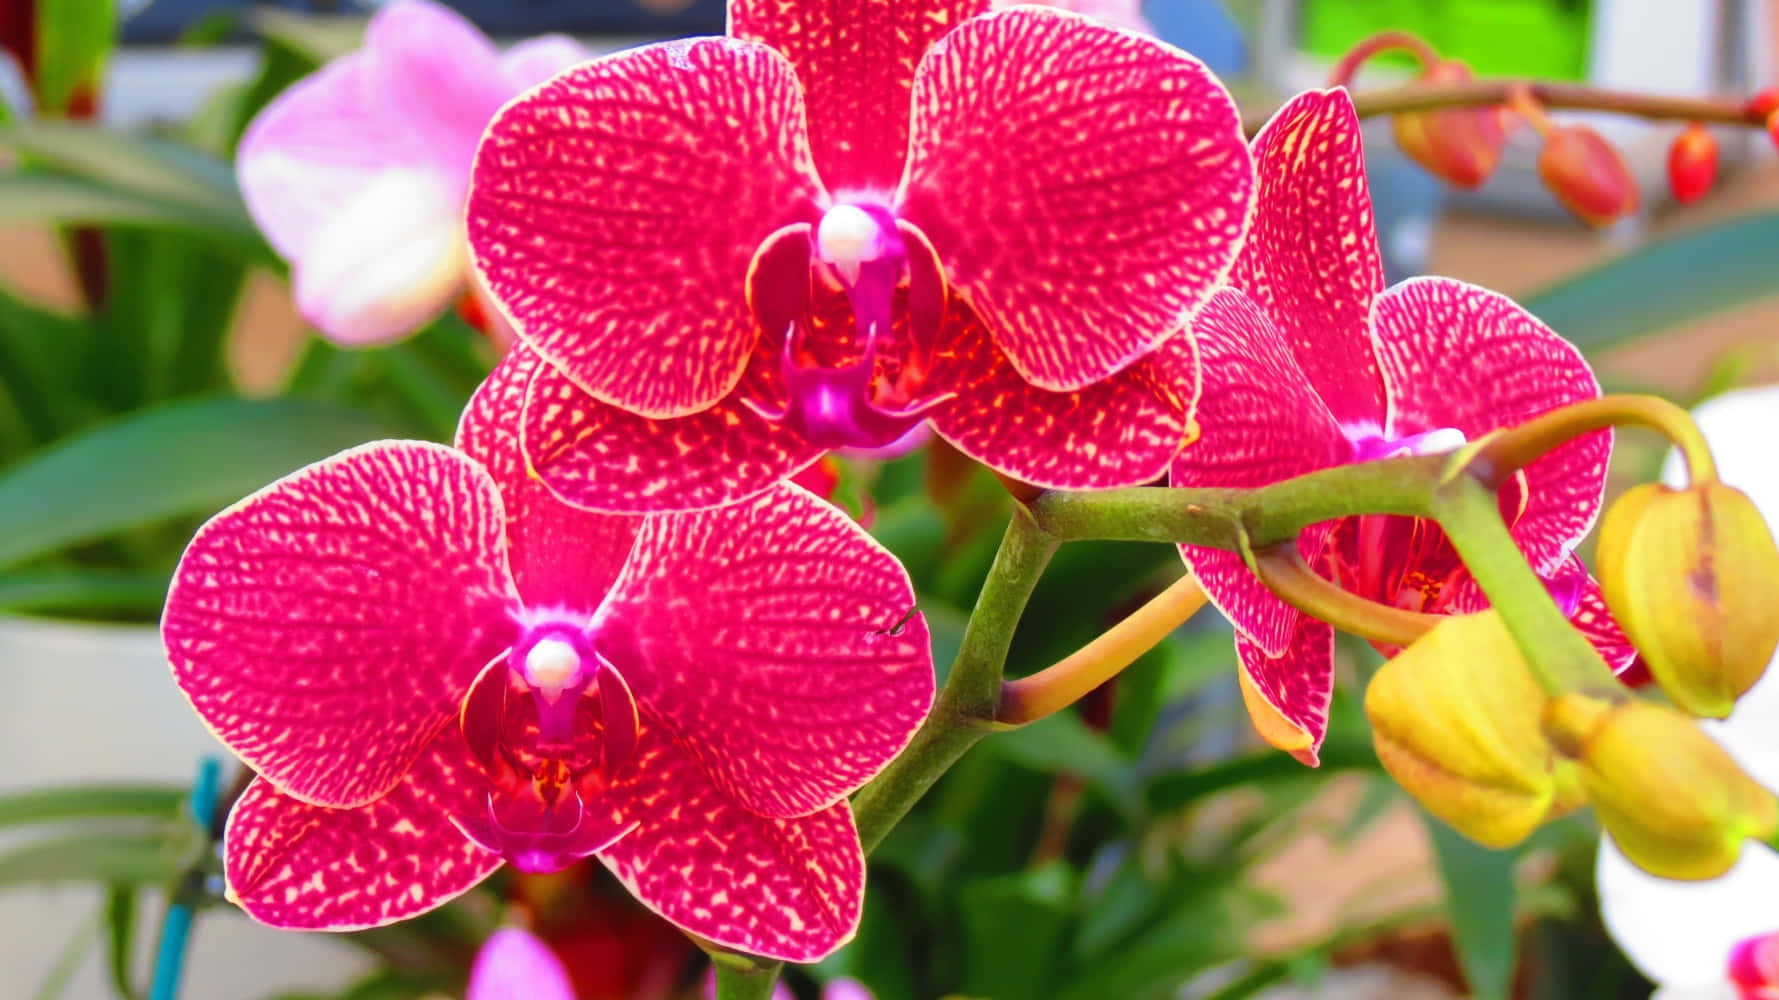 A soothing, vibrant shot of an orchid in bloom